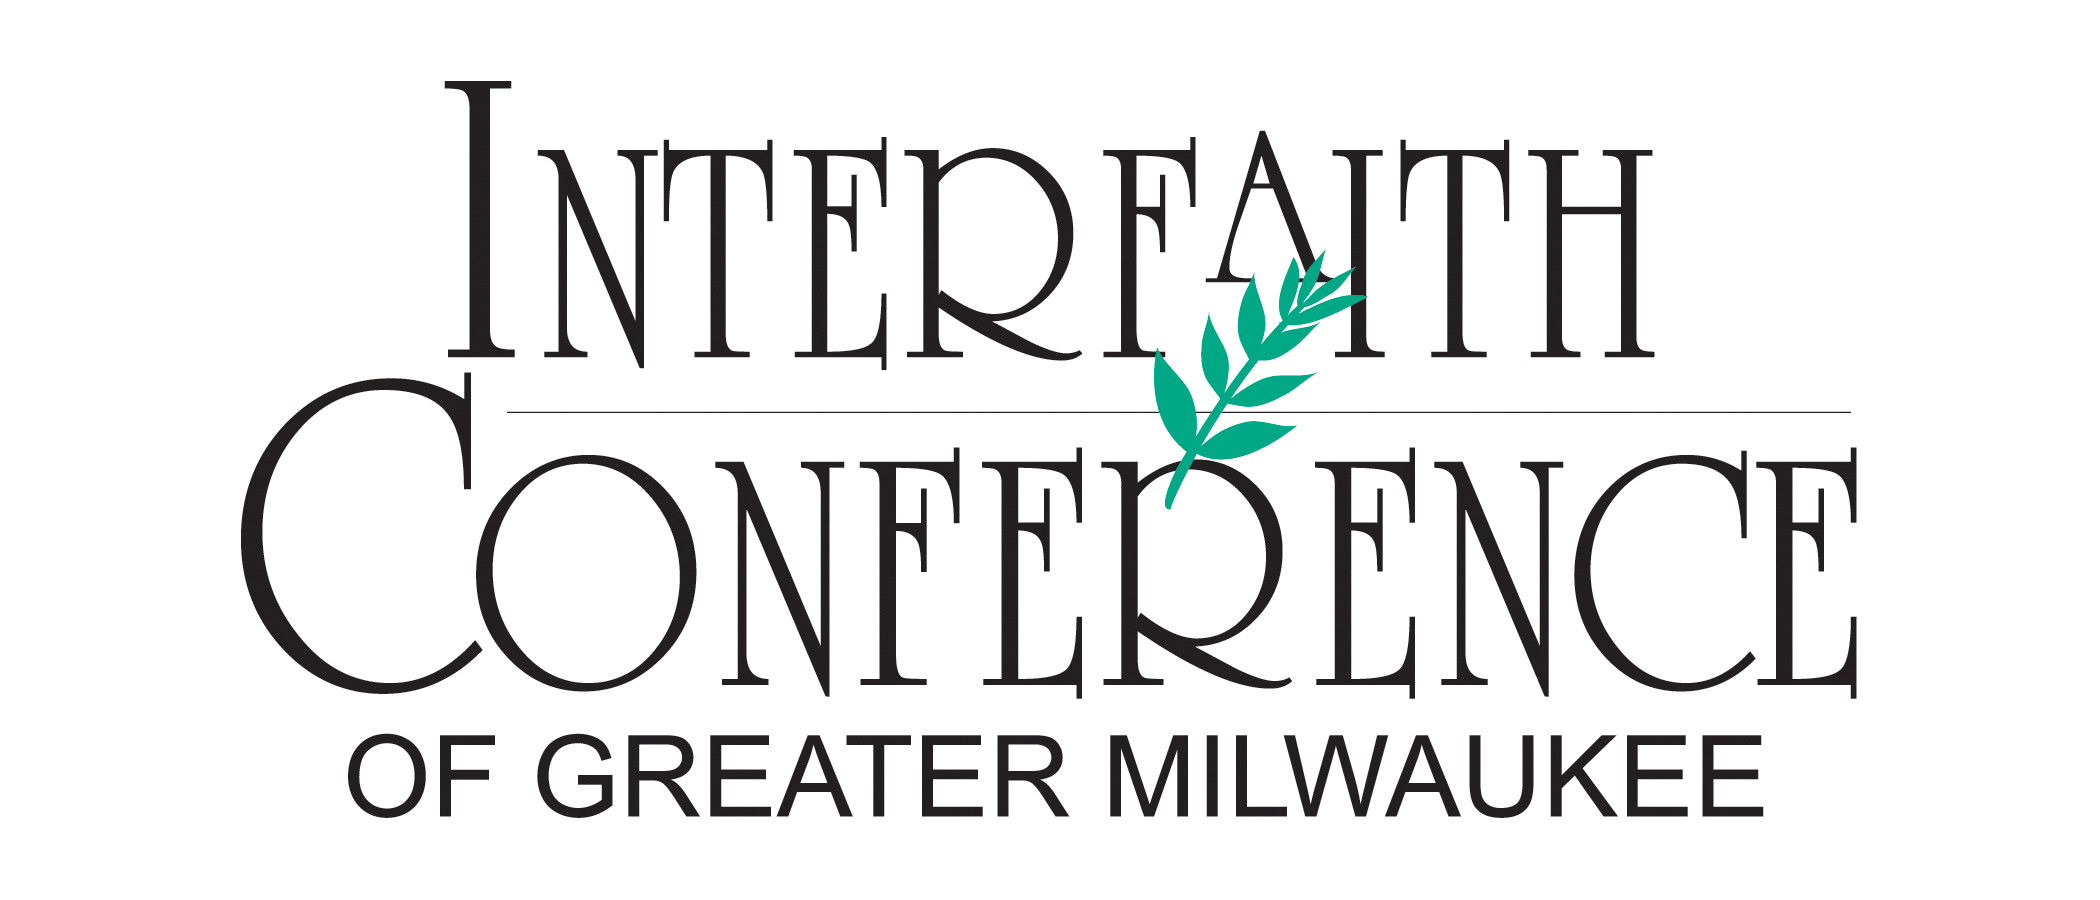 Interfaith Conference of Greater Milwaukee